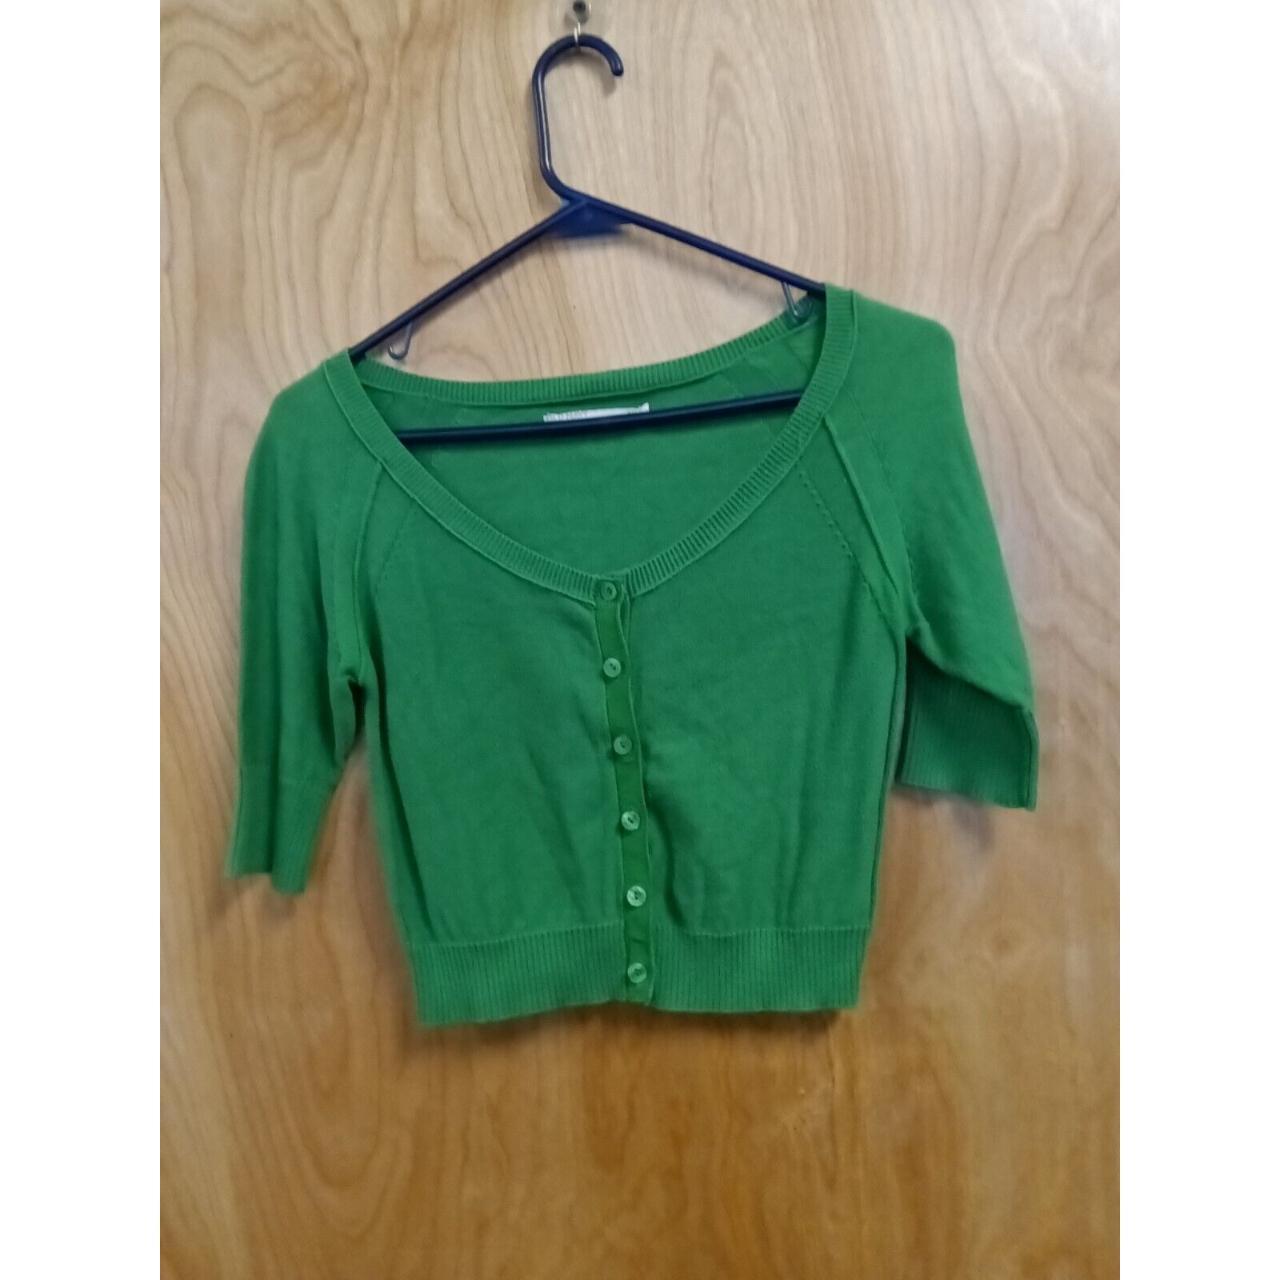 This Old Navy women's green cropped sweater in size... - Depop